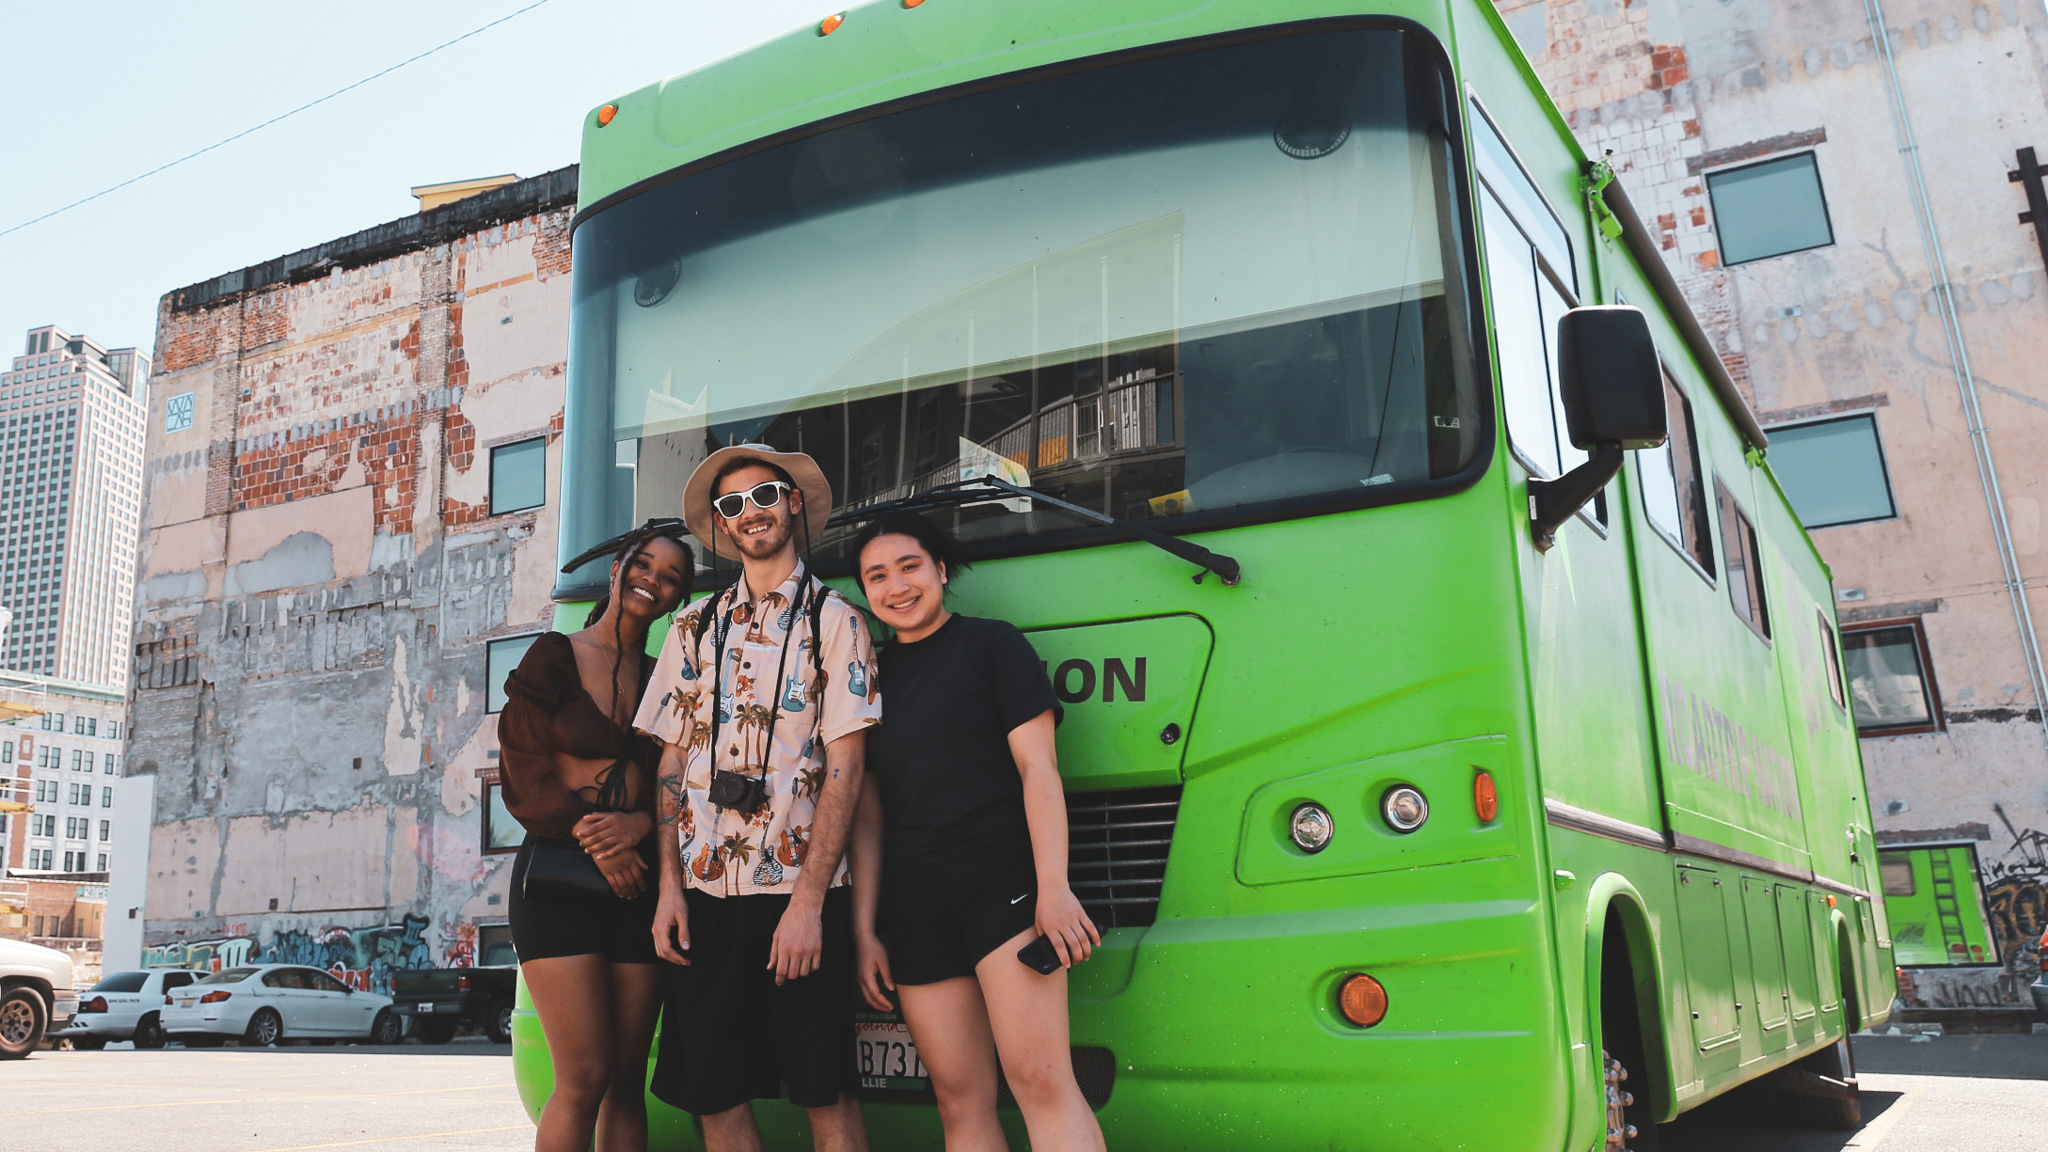 From left, roadtrippers Rahael, Jake, and Genevieve pose in front of the green RV.